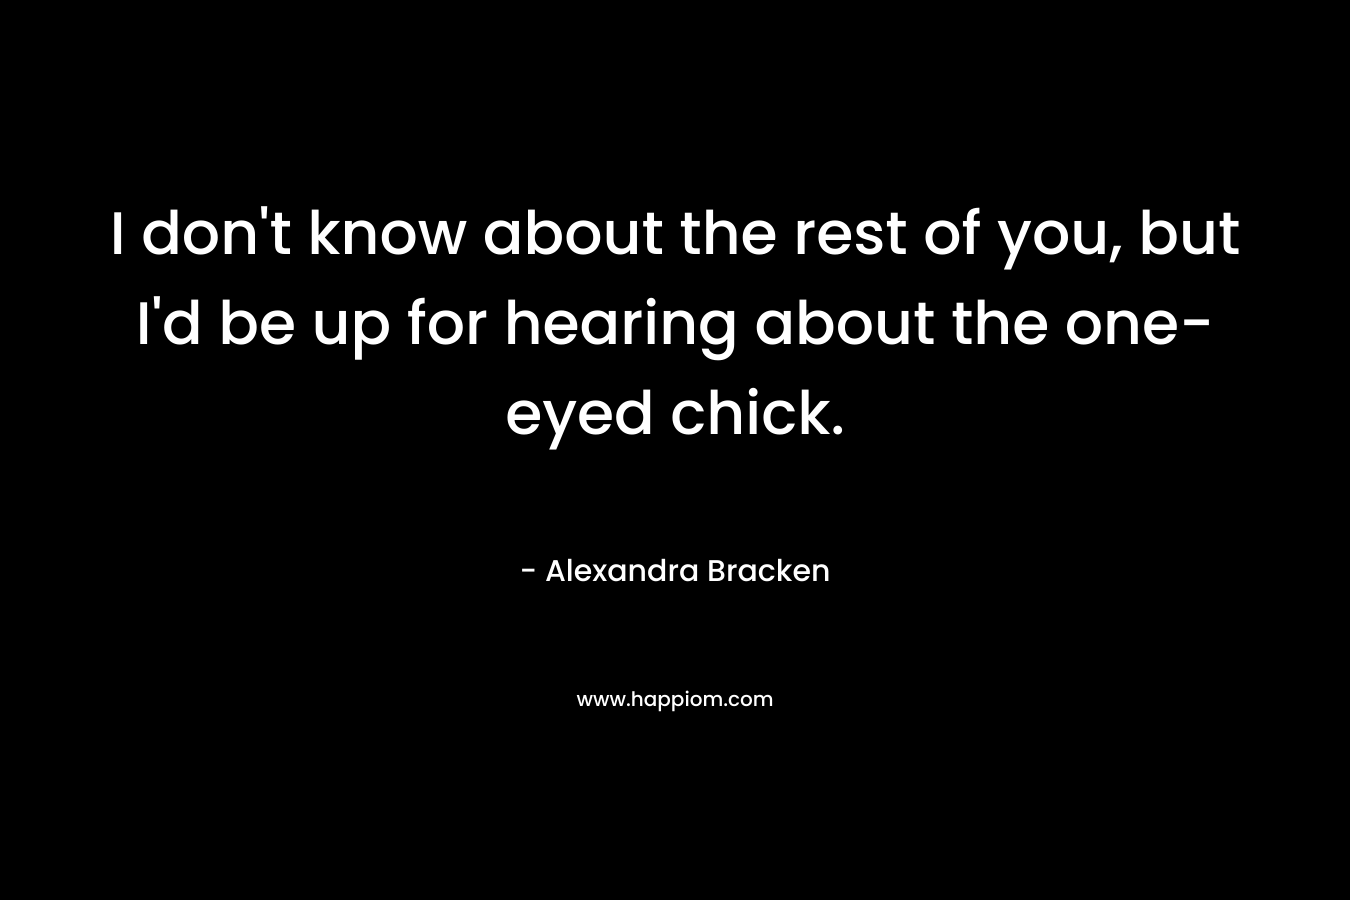 I don't know about the rest of you, but I'd be up for hearing about the one-eyed chick.